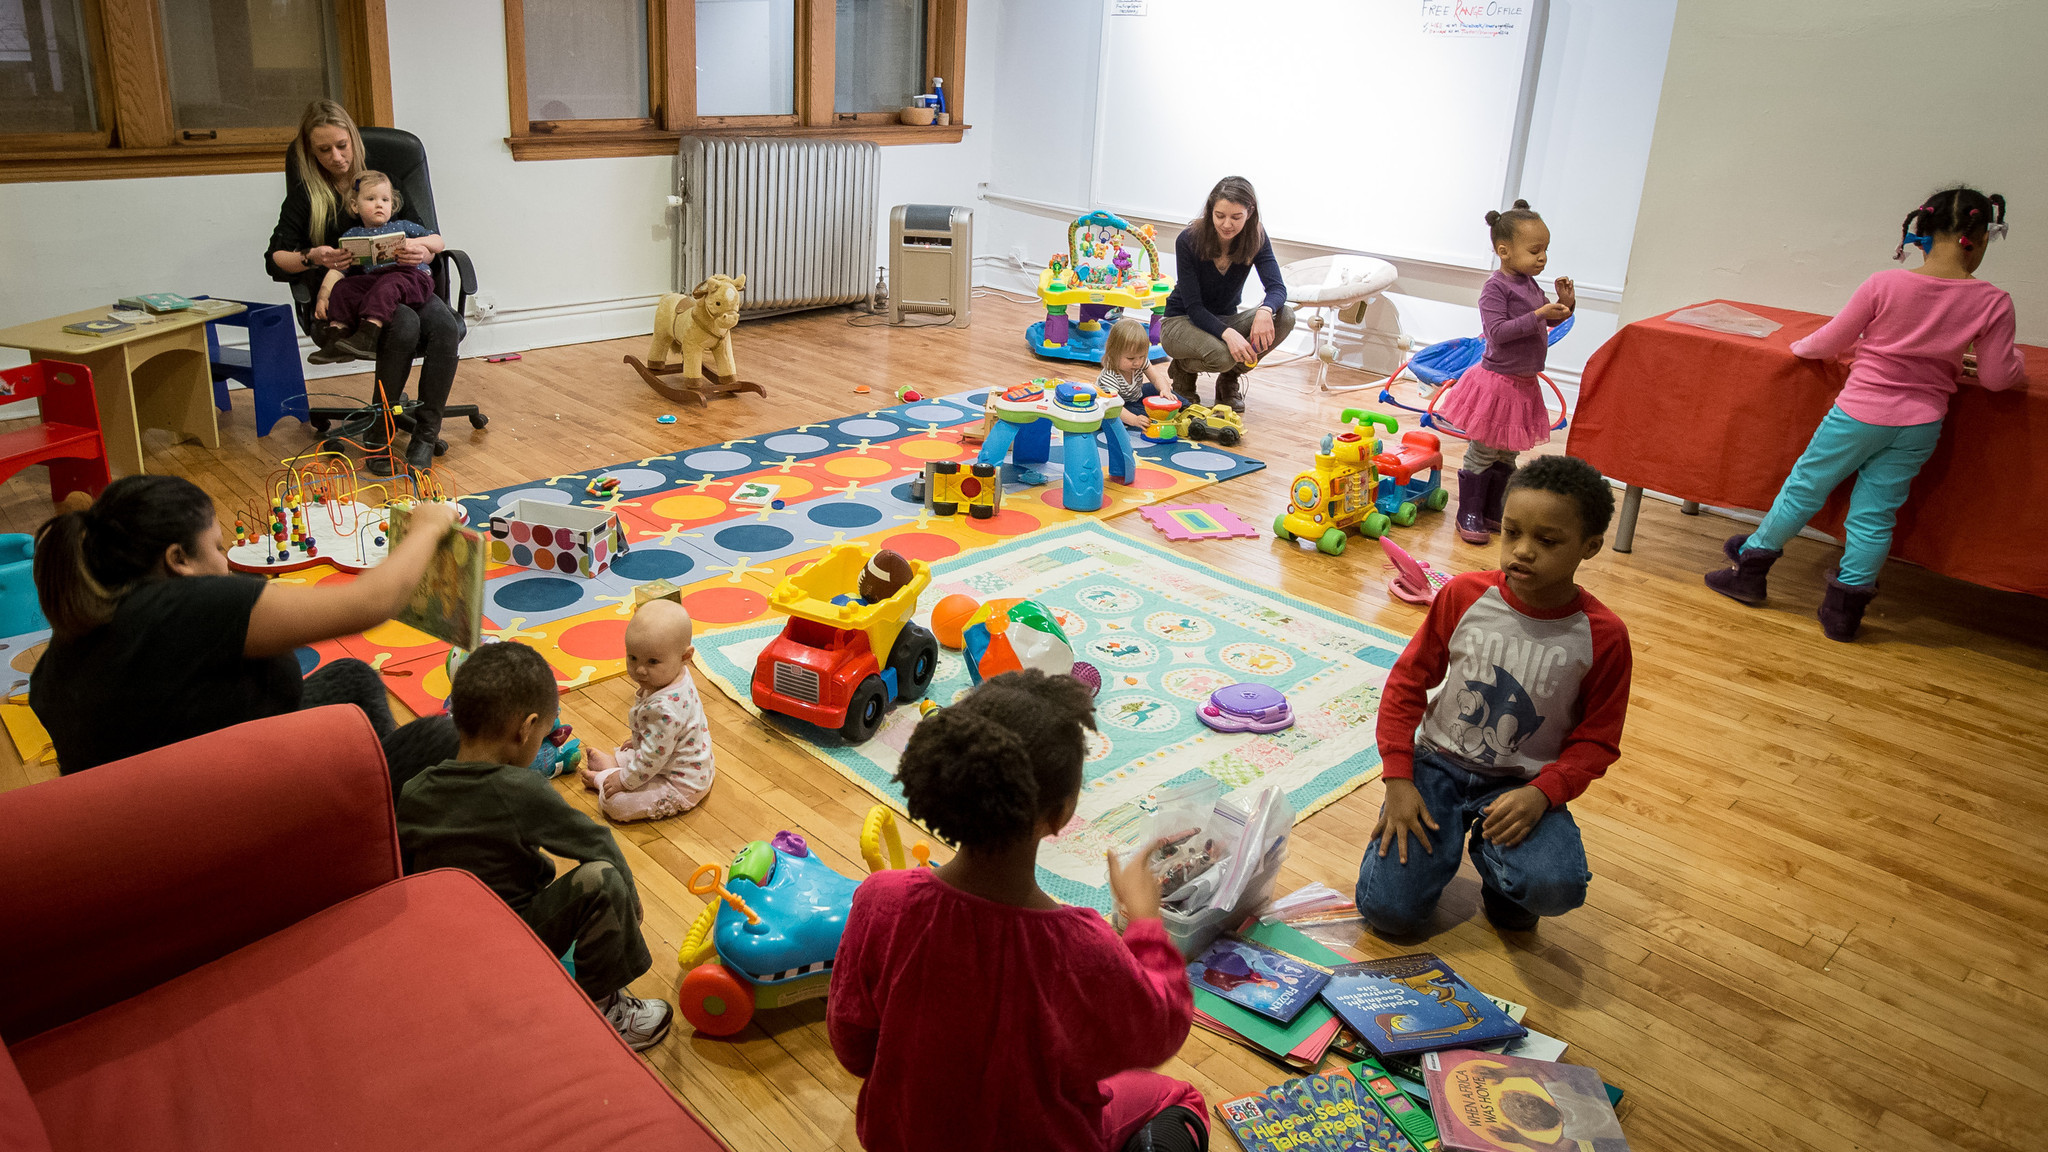 Coworking spaces hit a wall on offering childcare ...